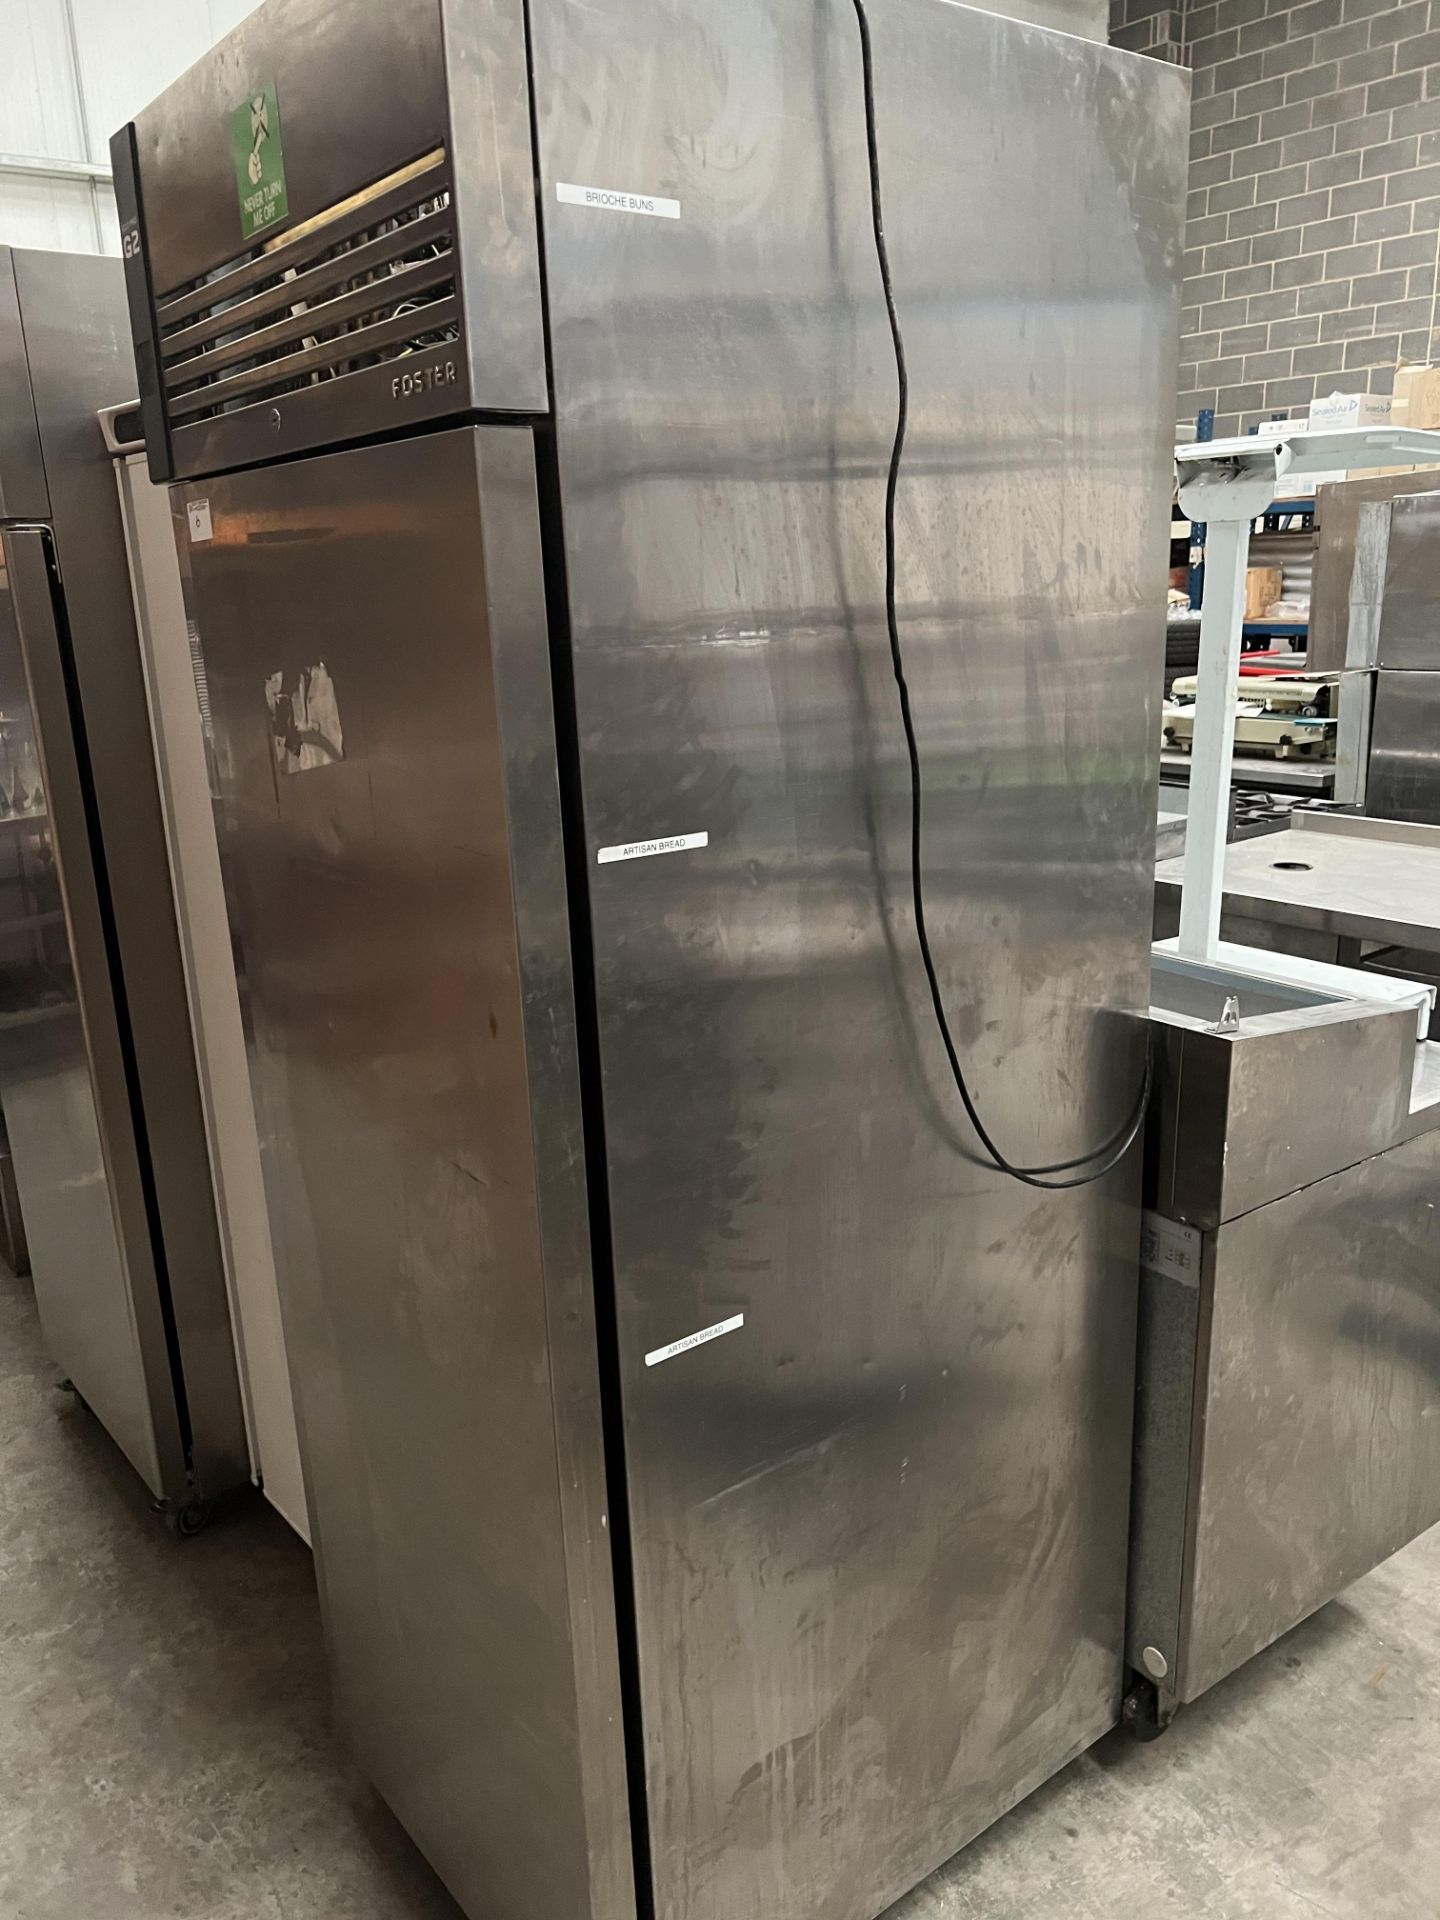 Foster G2 Upright Stainless Steel Fridge - Image 3 of 3